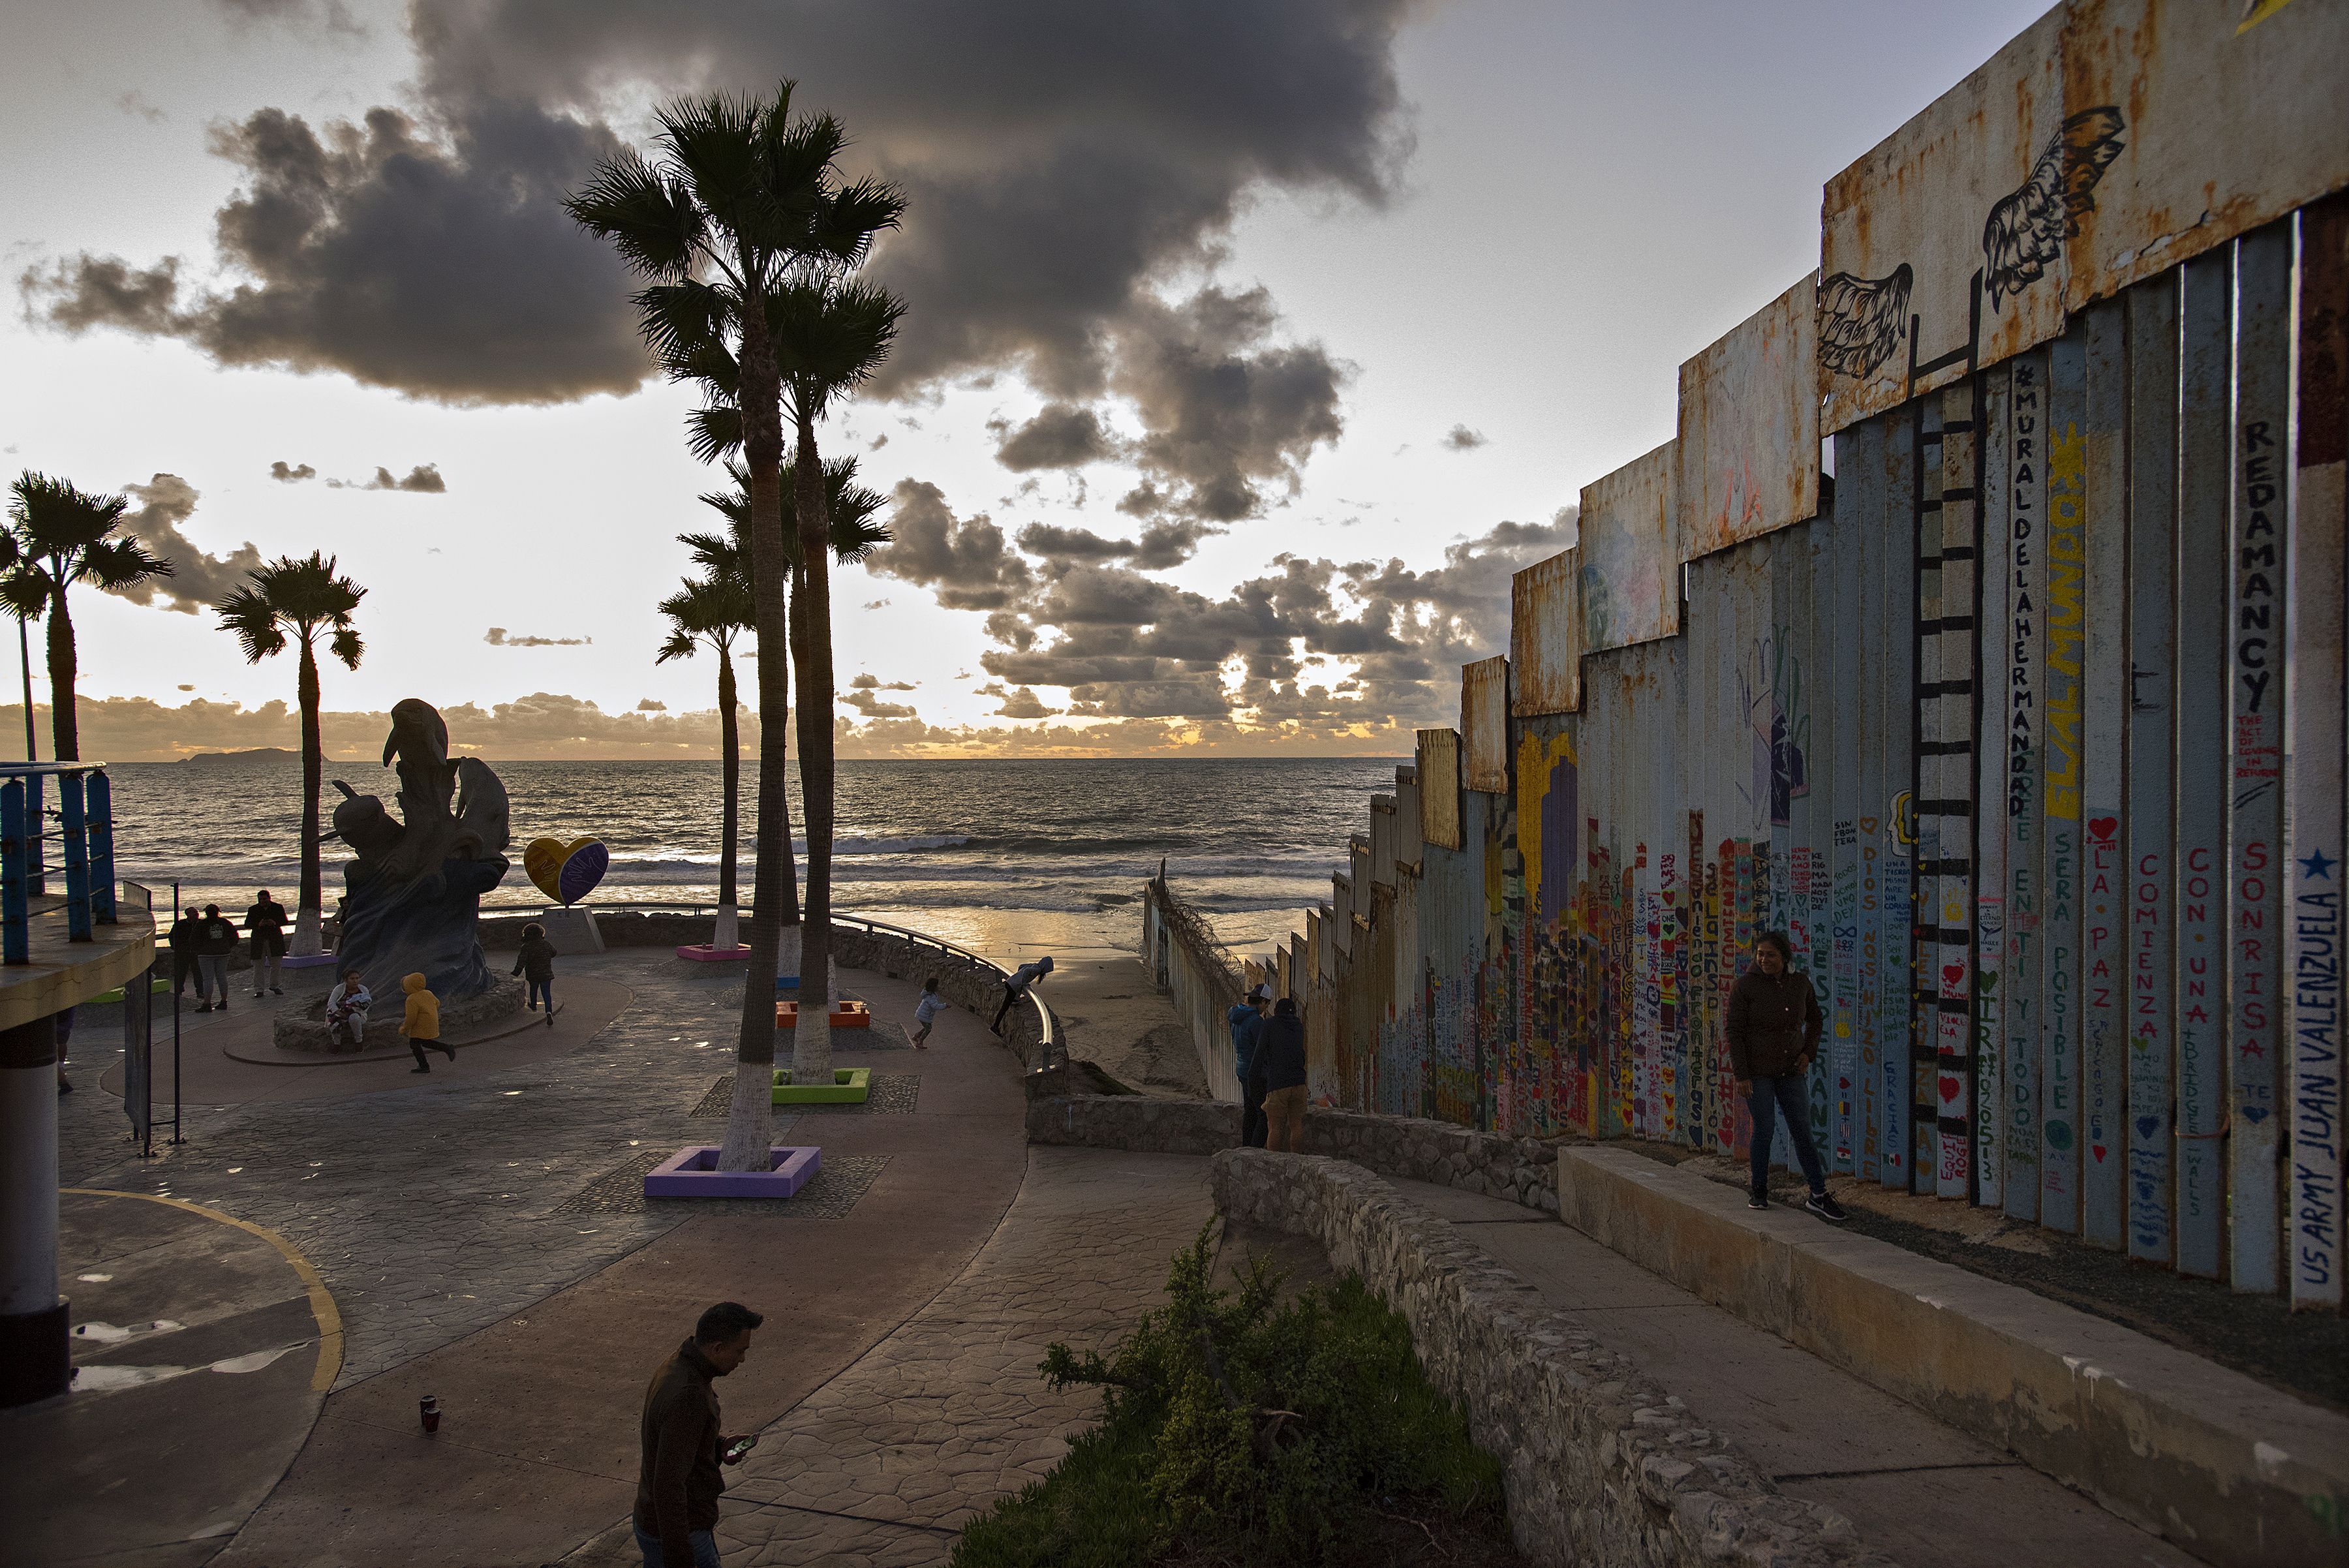 Visitors to Playas de Tijuana stop by the border wall at Friendship Park after sunset Nov. 29. The artwork along the border wall is temporary and changes frequently. Image by Amanda Cowan. Mexico, 2019.